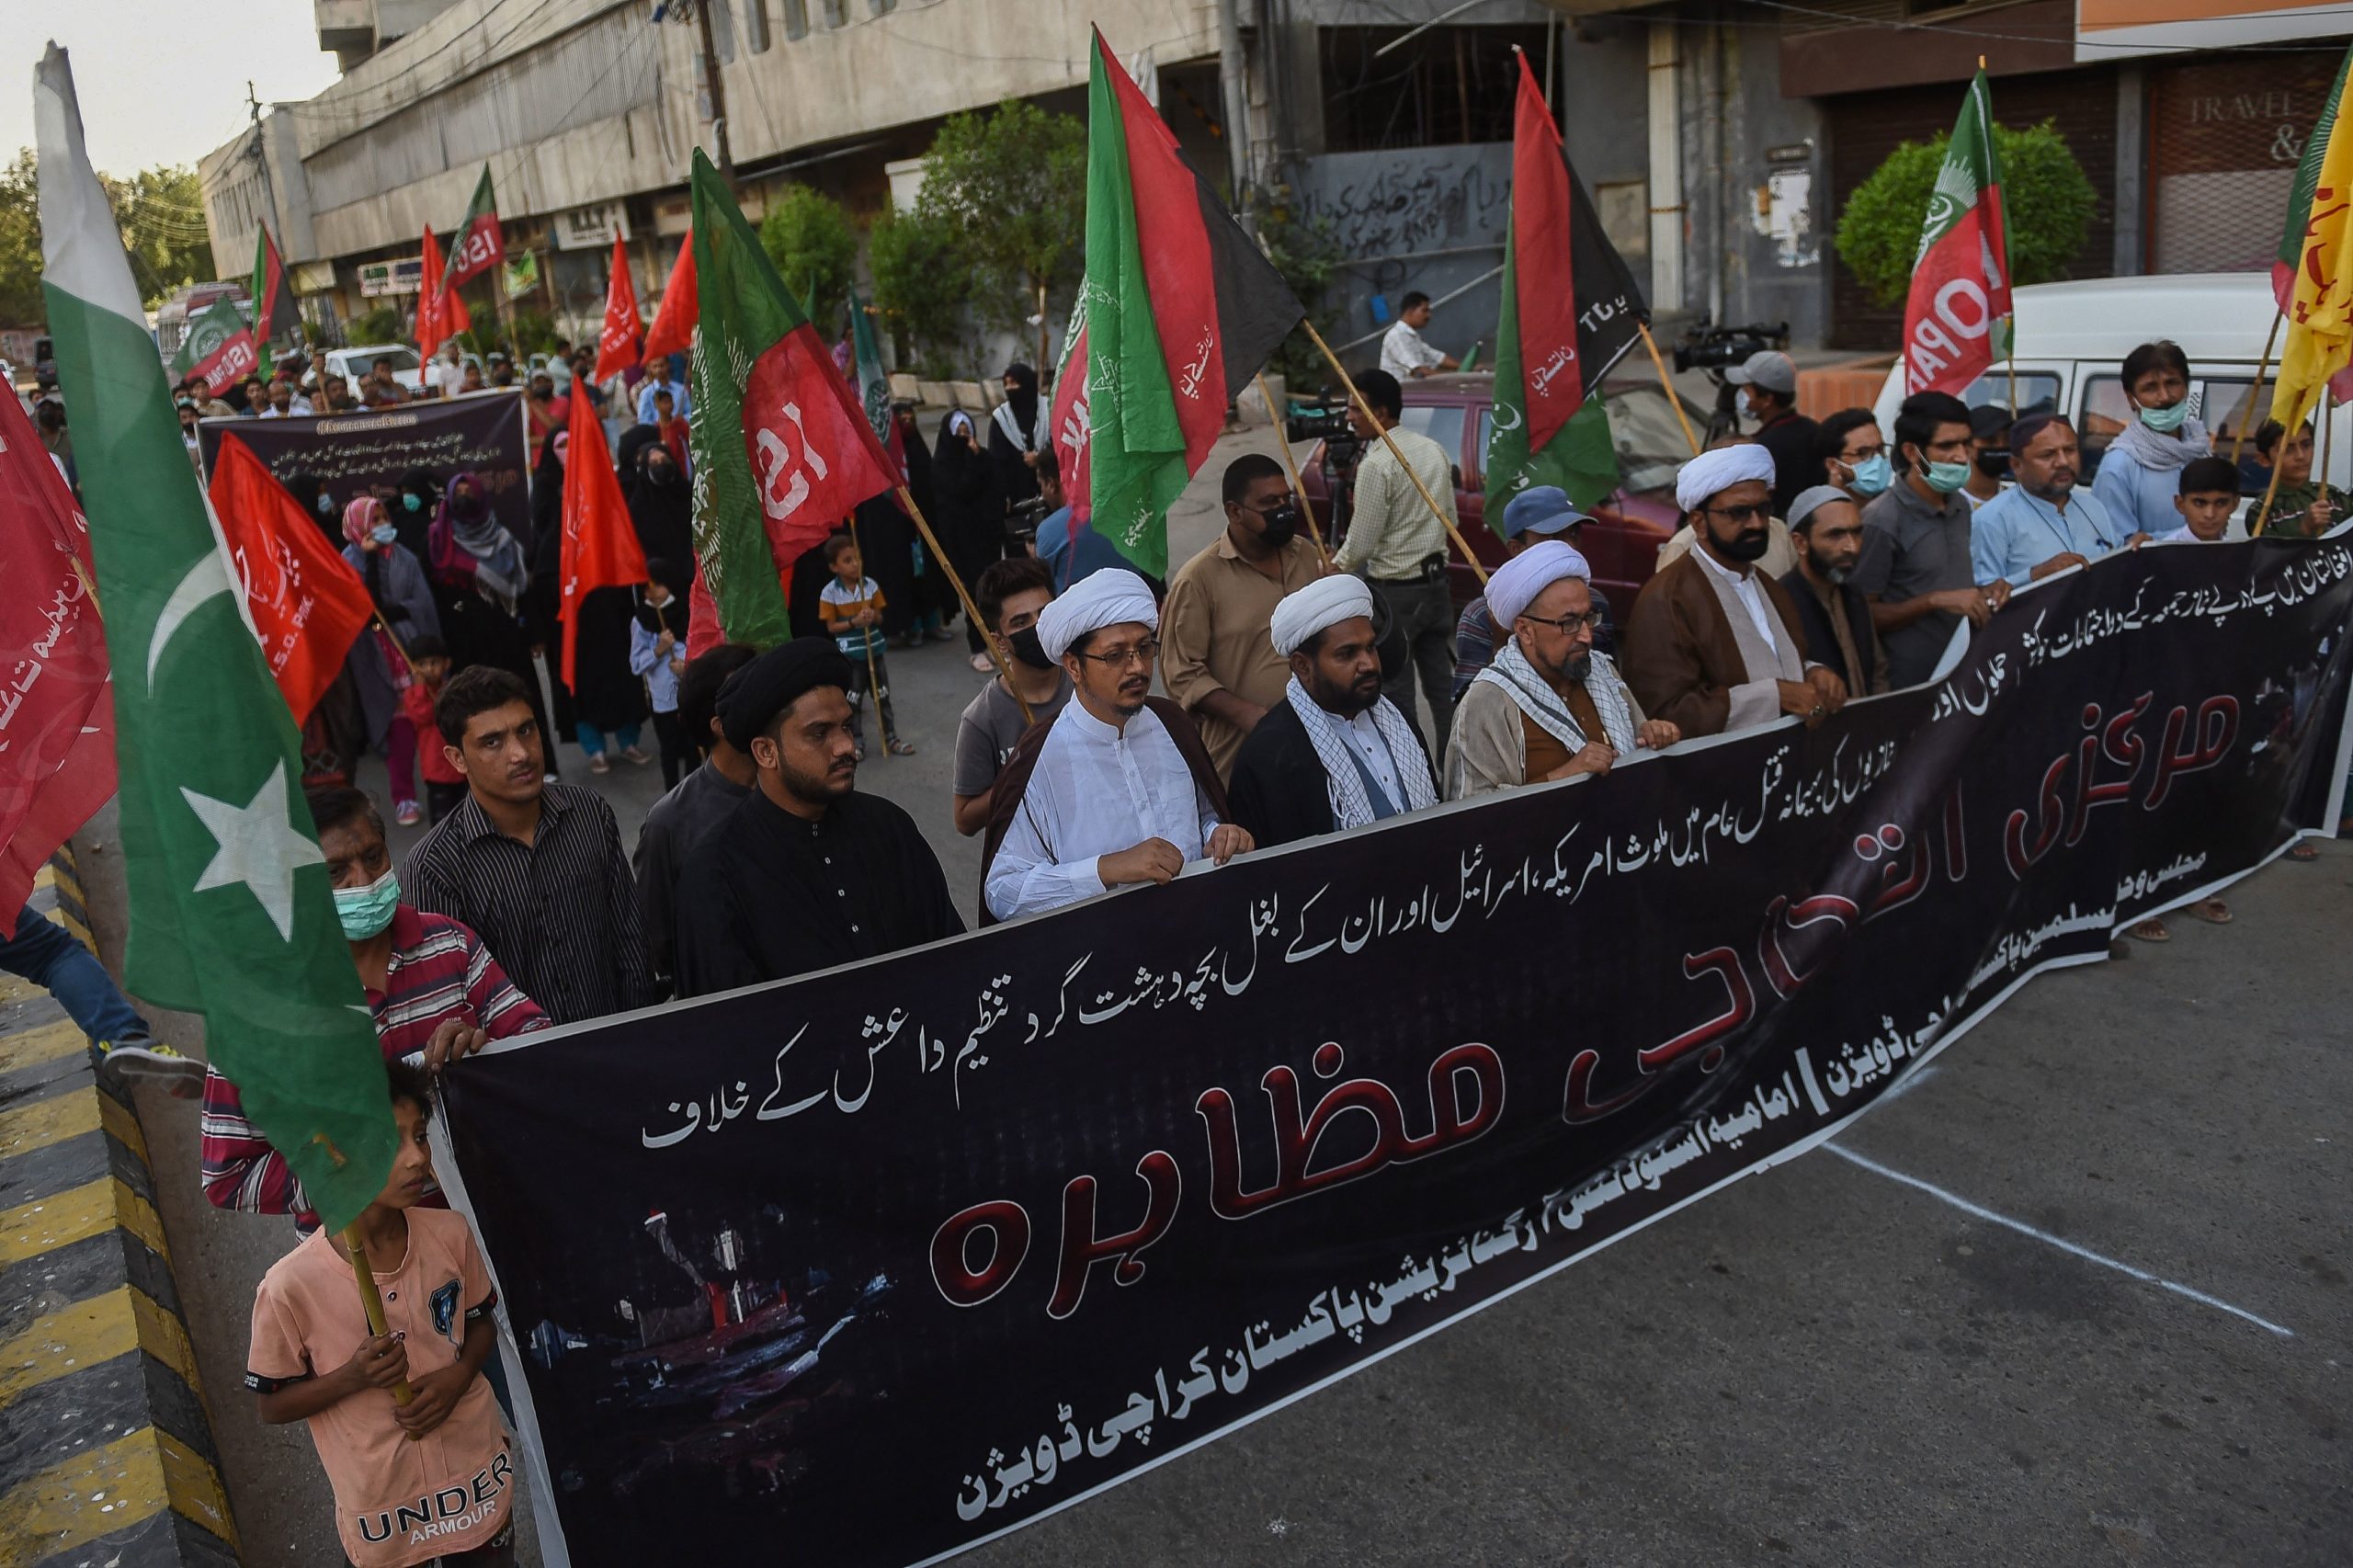 Pakistani Shiite Muslims stage a demonstration in Karachi on October 17, 2021 to protest against a suicide bomb attack that took place earlier at a Shiite mosque during Friday prayers in Kandahar, Afghanistan. (Photo by RIZWAN TABASSUM/AFP via Getty Images)